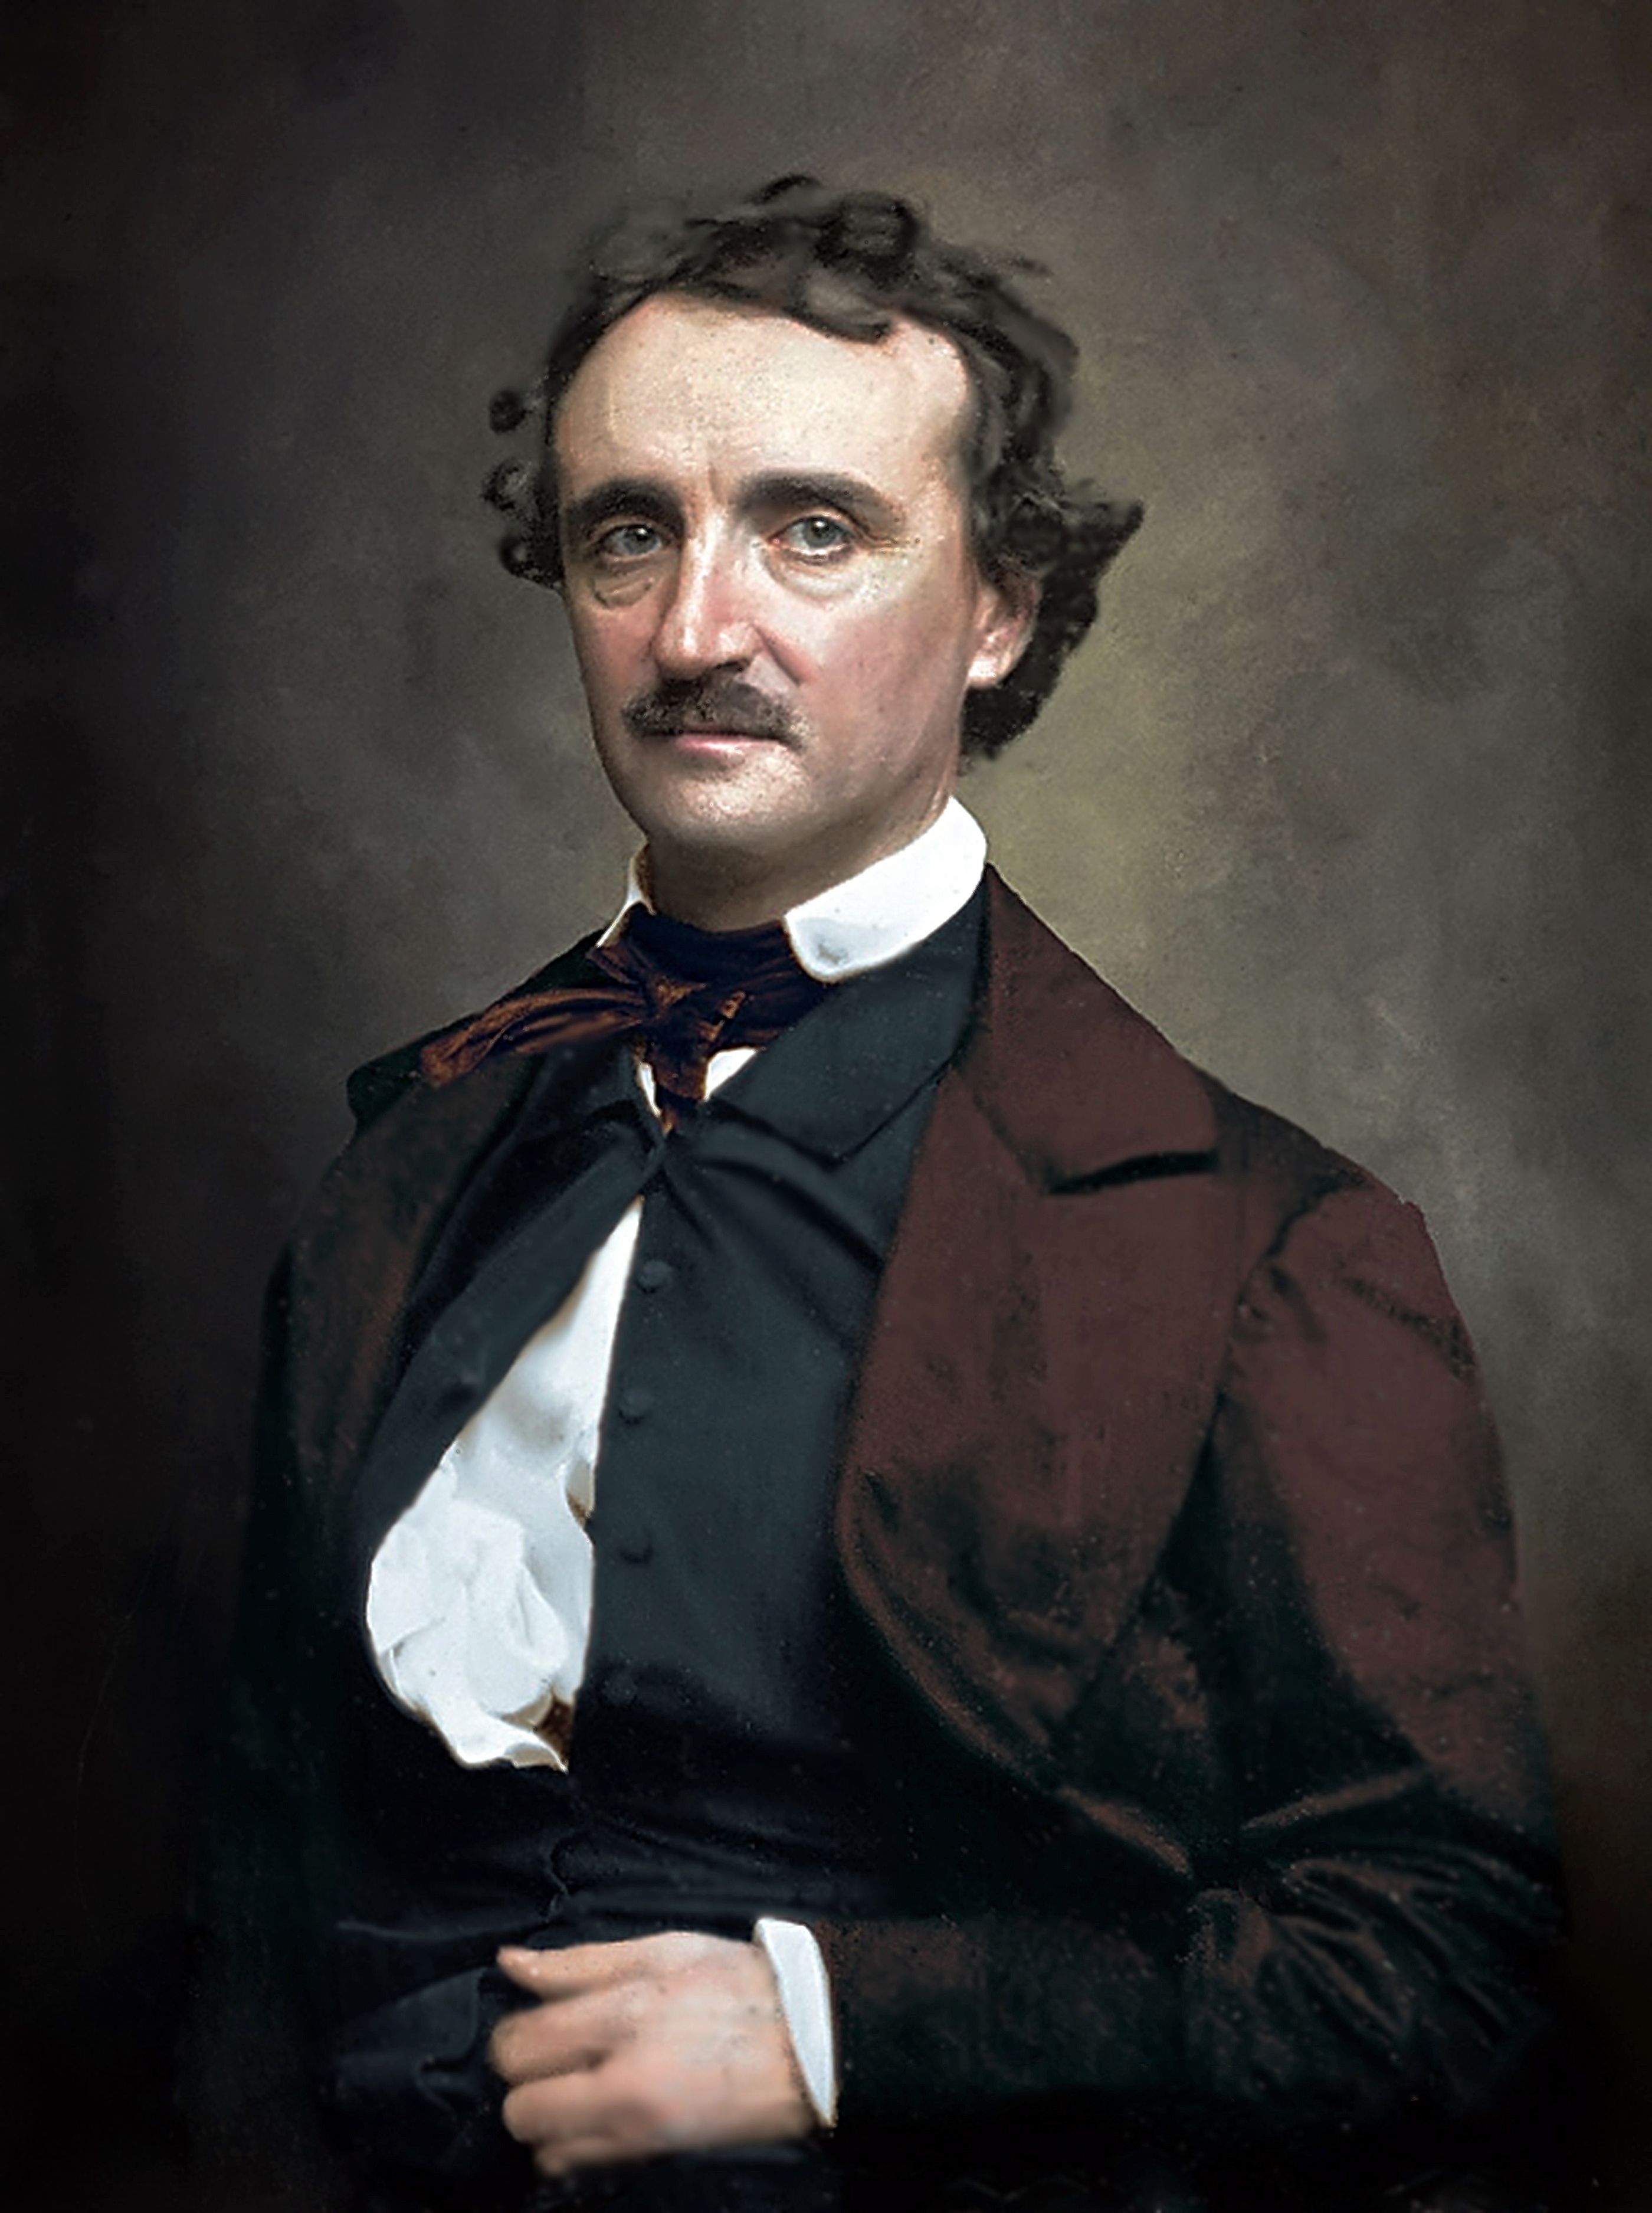 Edgar Allan Poe Quotes | Master of Mystery and Macabre Short Stories